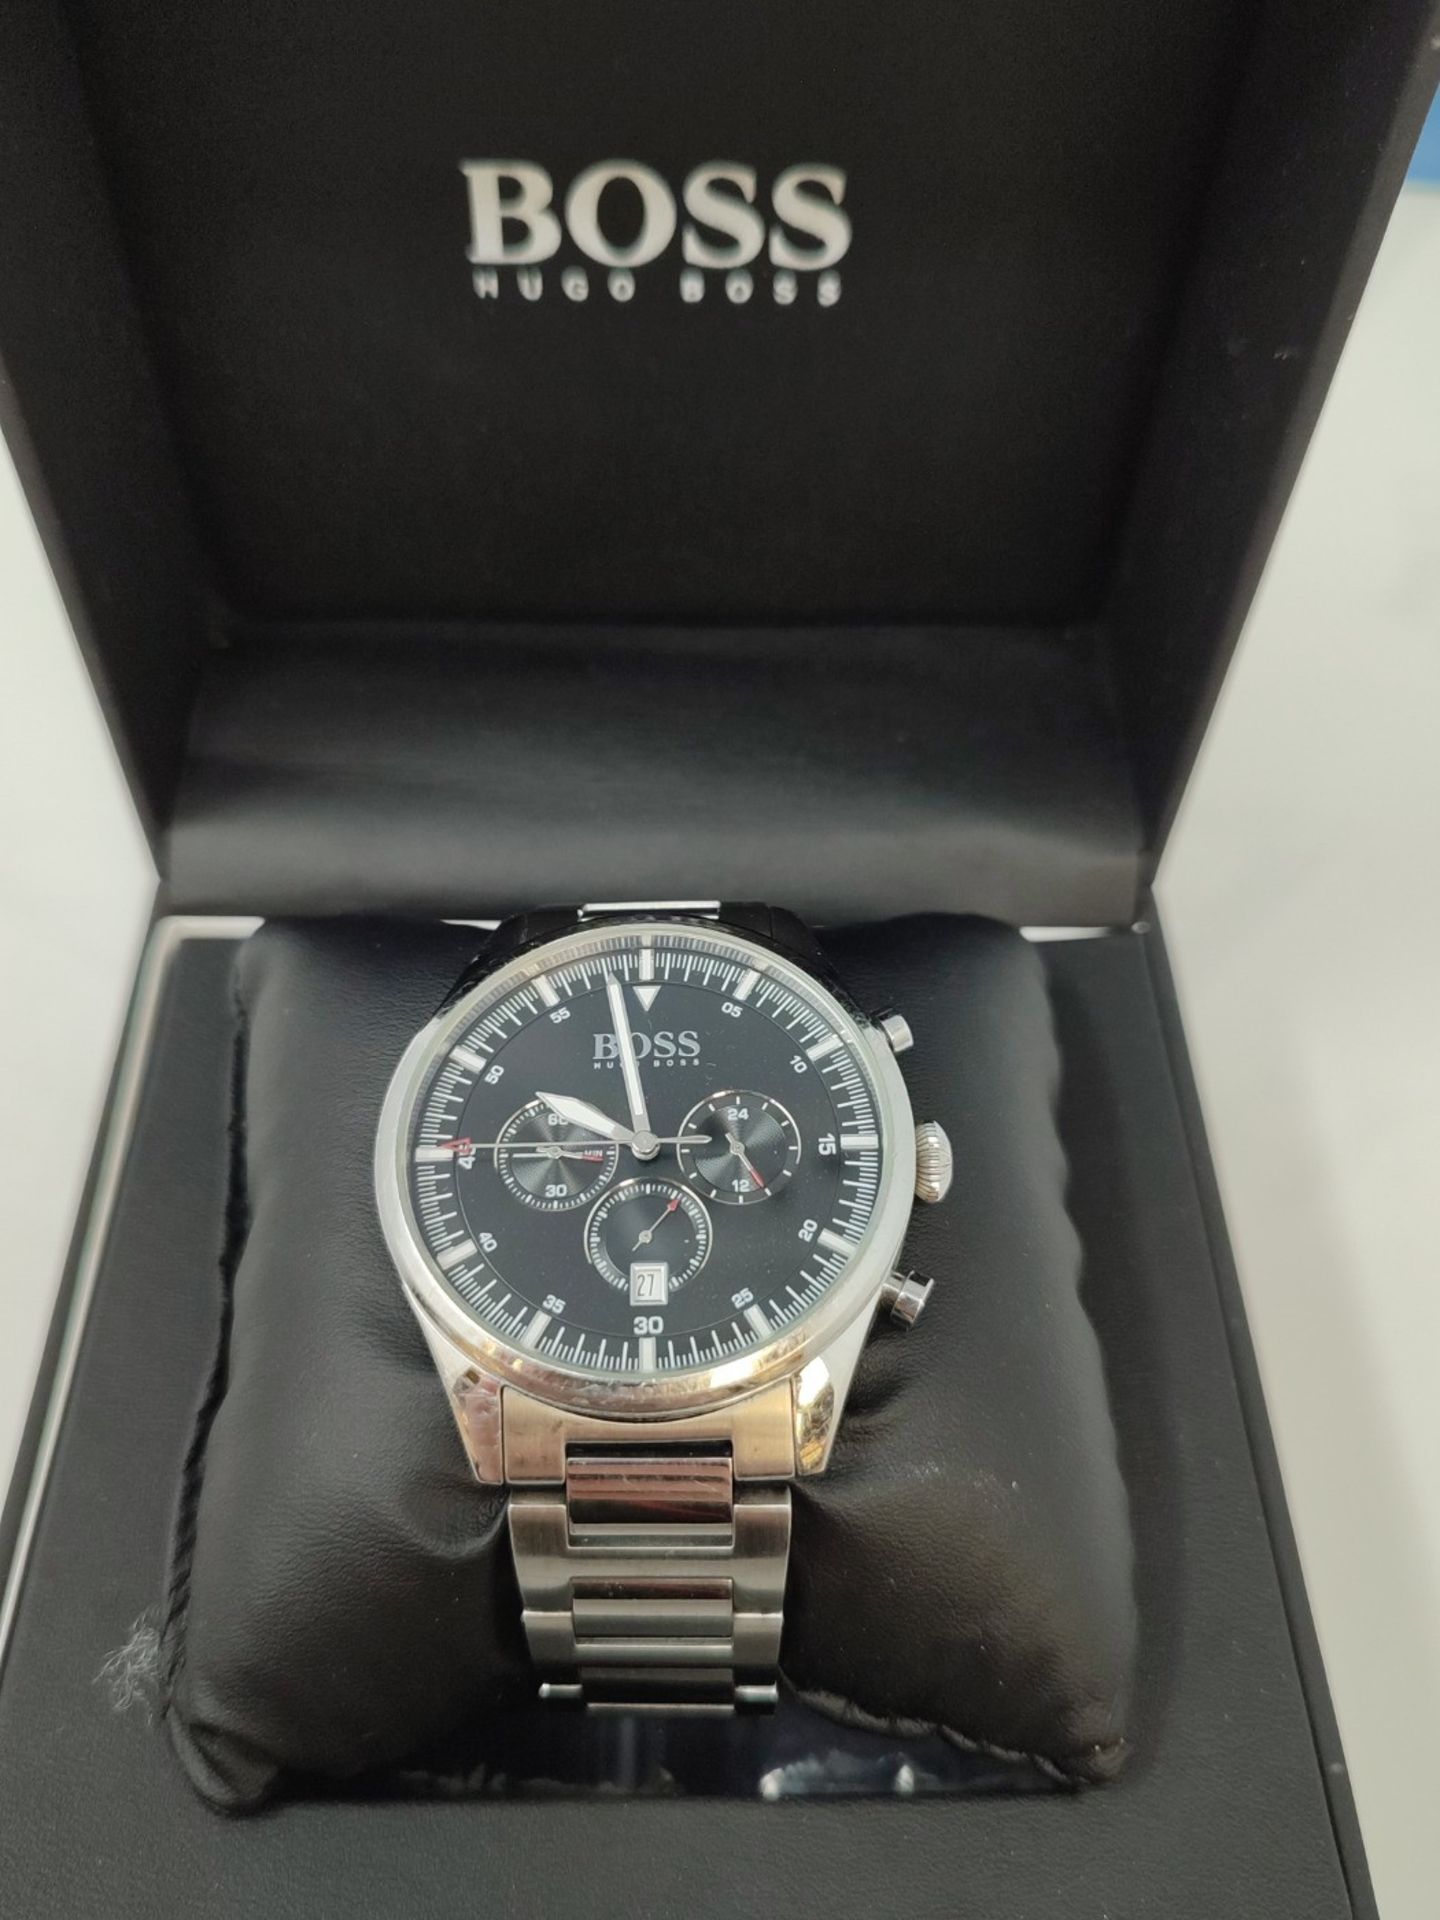 RRP £249.00 BOSS Chronograph Quartz Watch for Men with Silver Stainless Steel Bracelet - 1513712 - Image 2 of 6